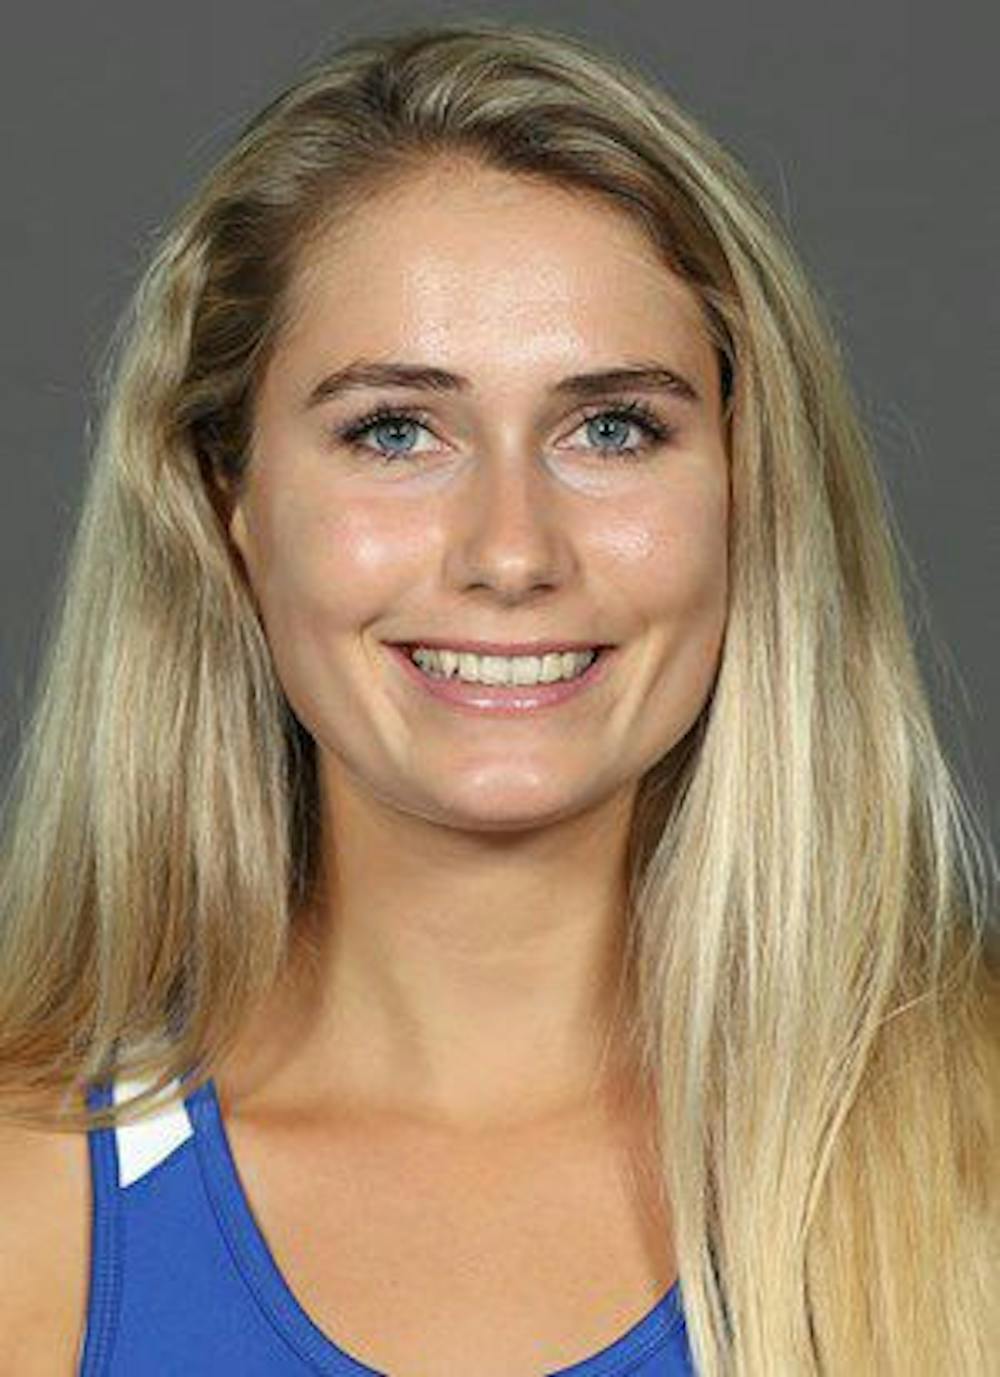 <p>Sophomore Ida Jarlskog nearly completed an improbable comeback Thursday. She lost to Vanderbilt's Fernanda Contreras, 6-1, 0-6, 6-4 in the round of 16 at the ITA Fall National Championships.&nbsp;</p>